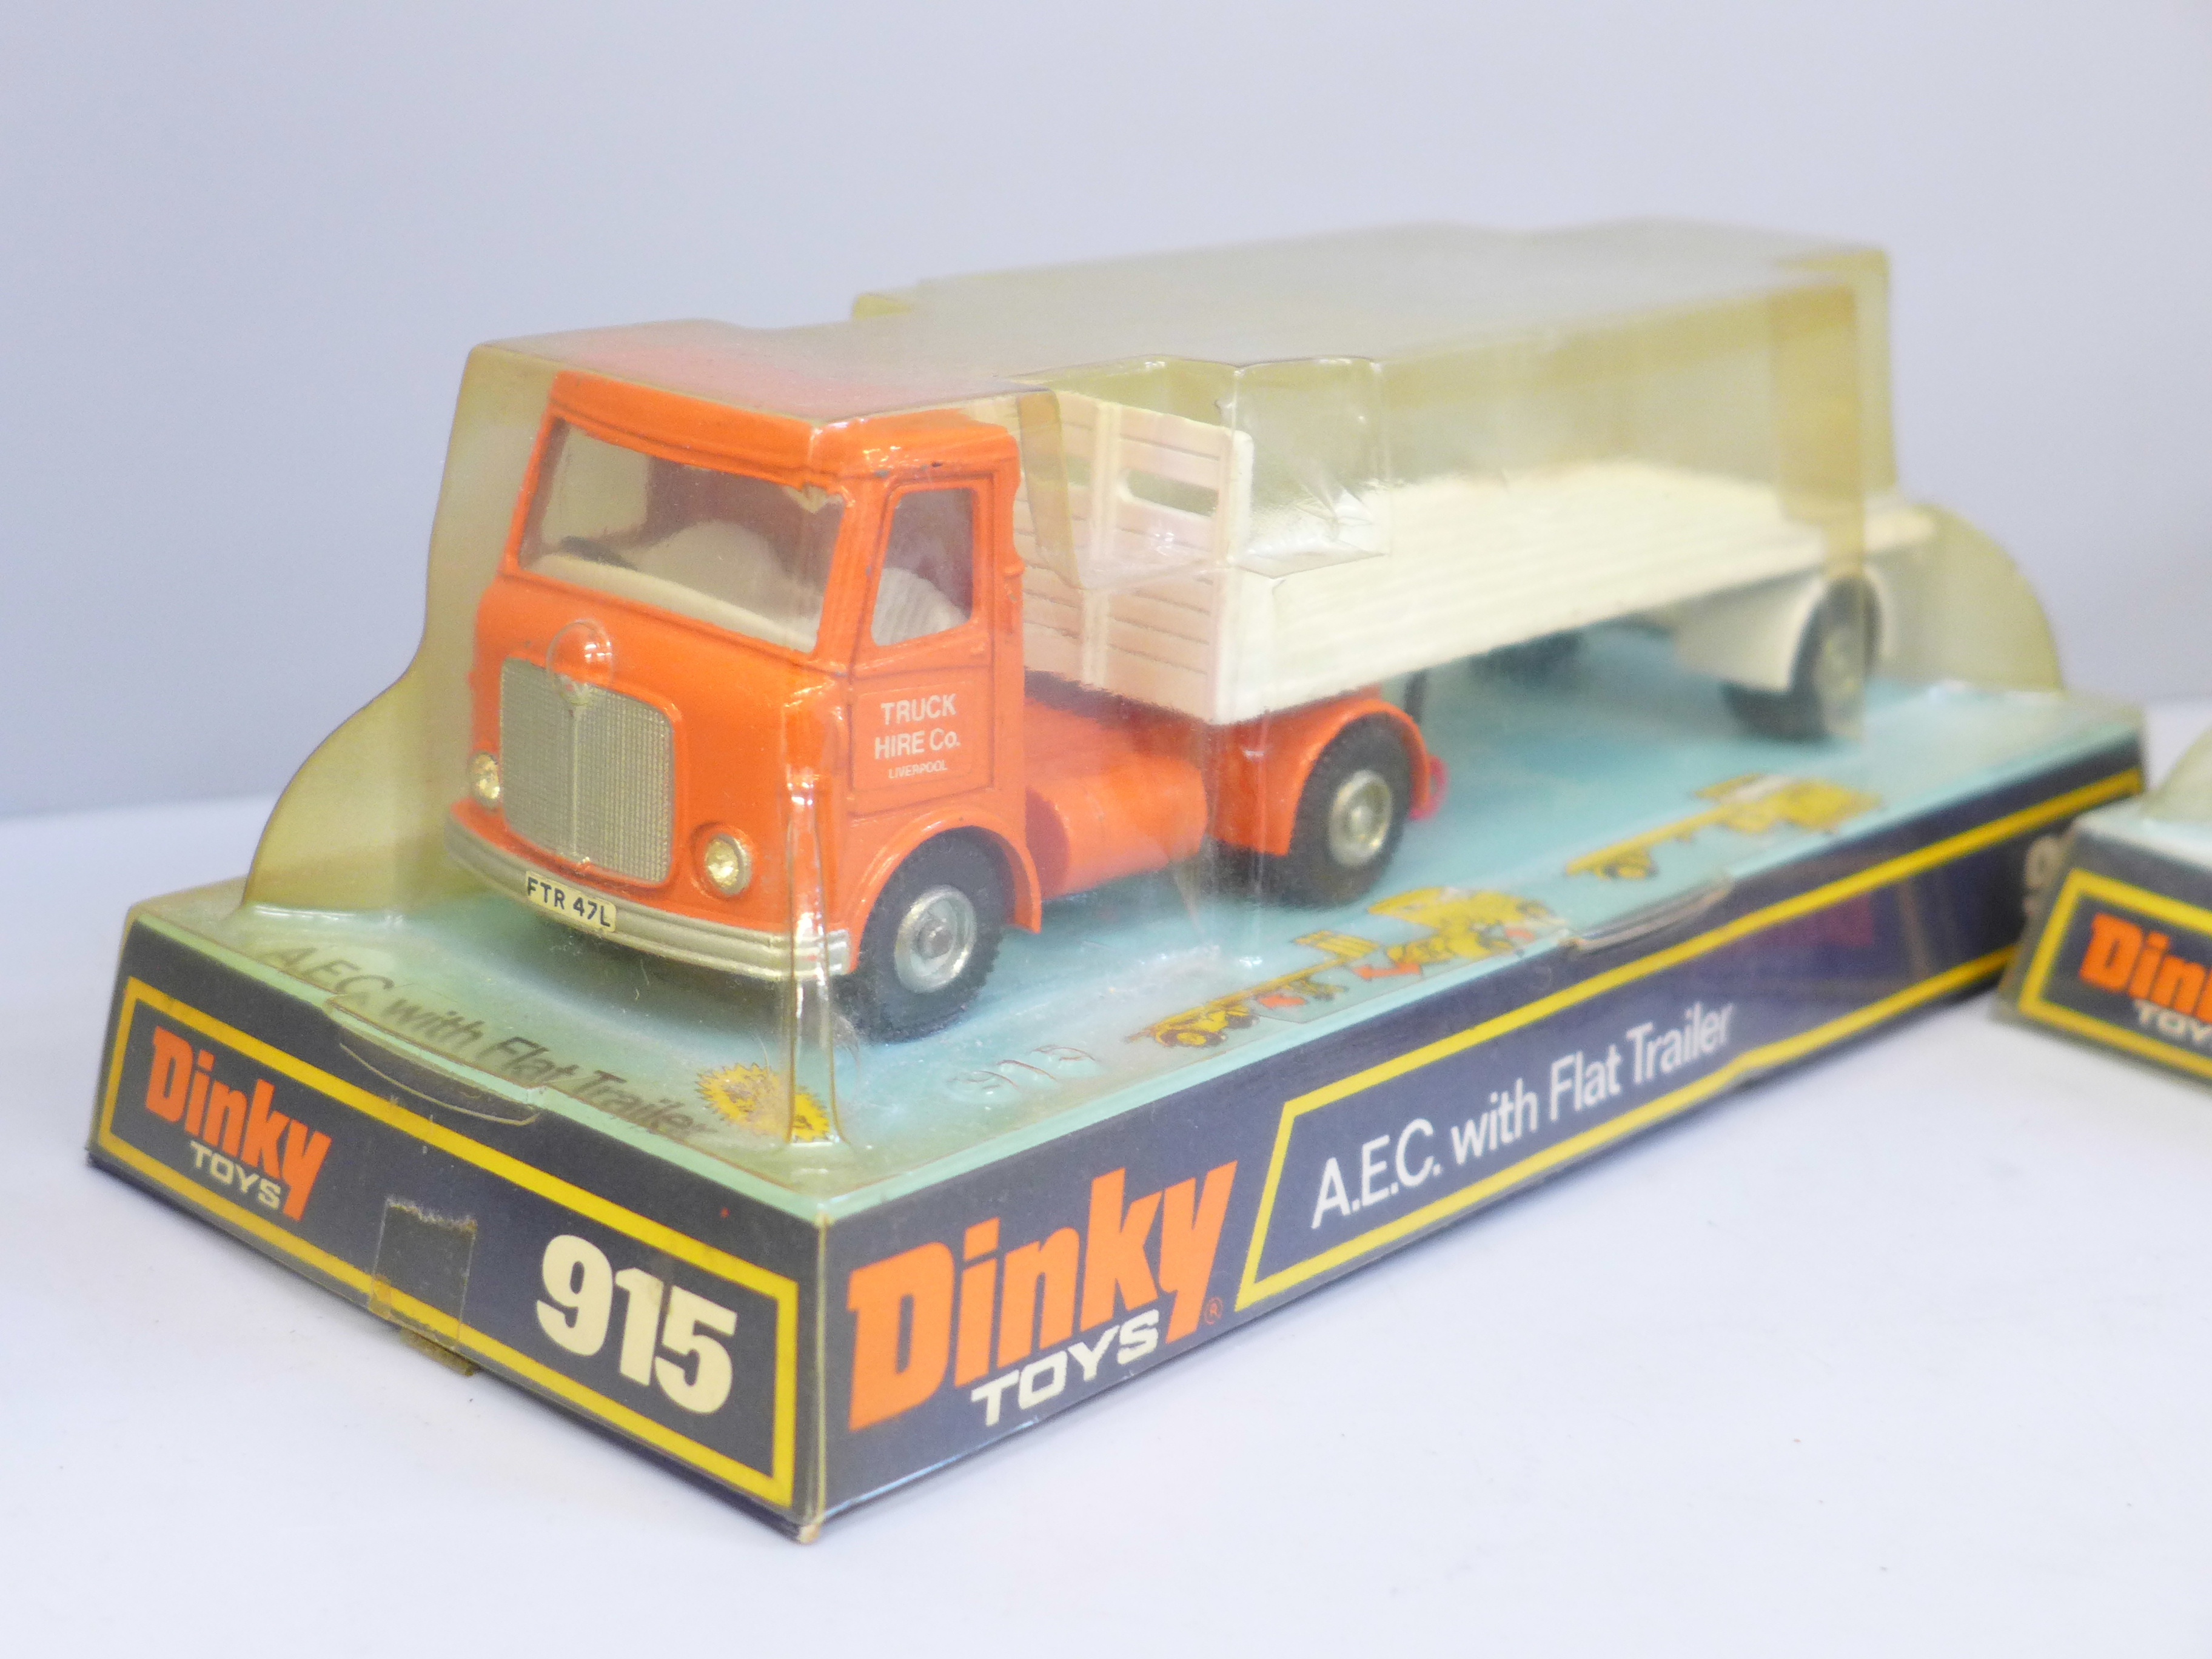 Two Dinky Toys model vehicles - A.E.C. with flat trailer, 915 and Road Grader, 963 in original - Image 2 of 3